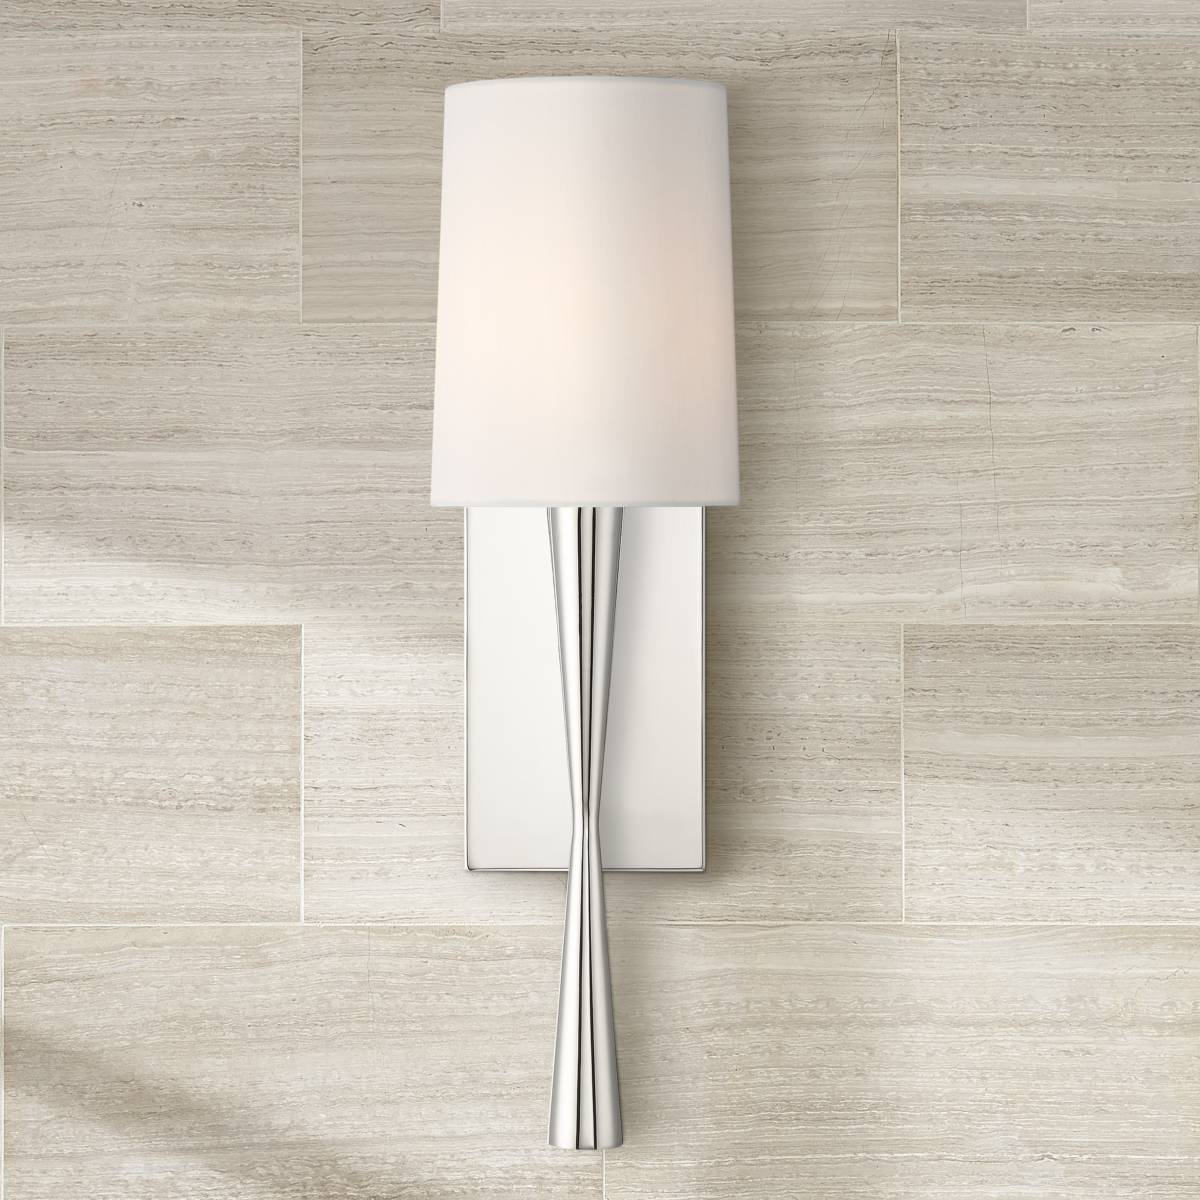 Crystorama Trenton 18 And One Half High Polished Nickel Wall Sconce  55v24cropped ?qlt=70&wid=1200&hei=1200&fmt=jpeg